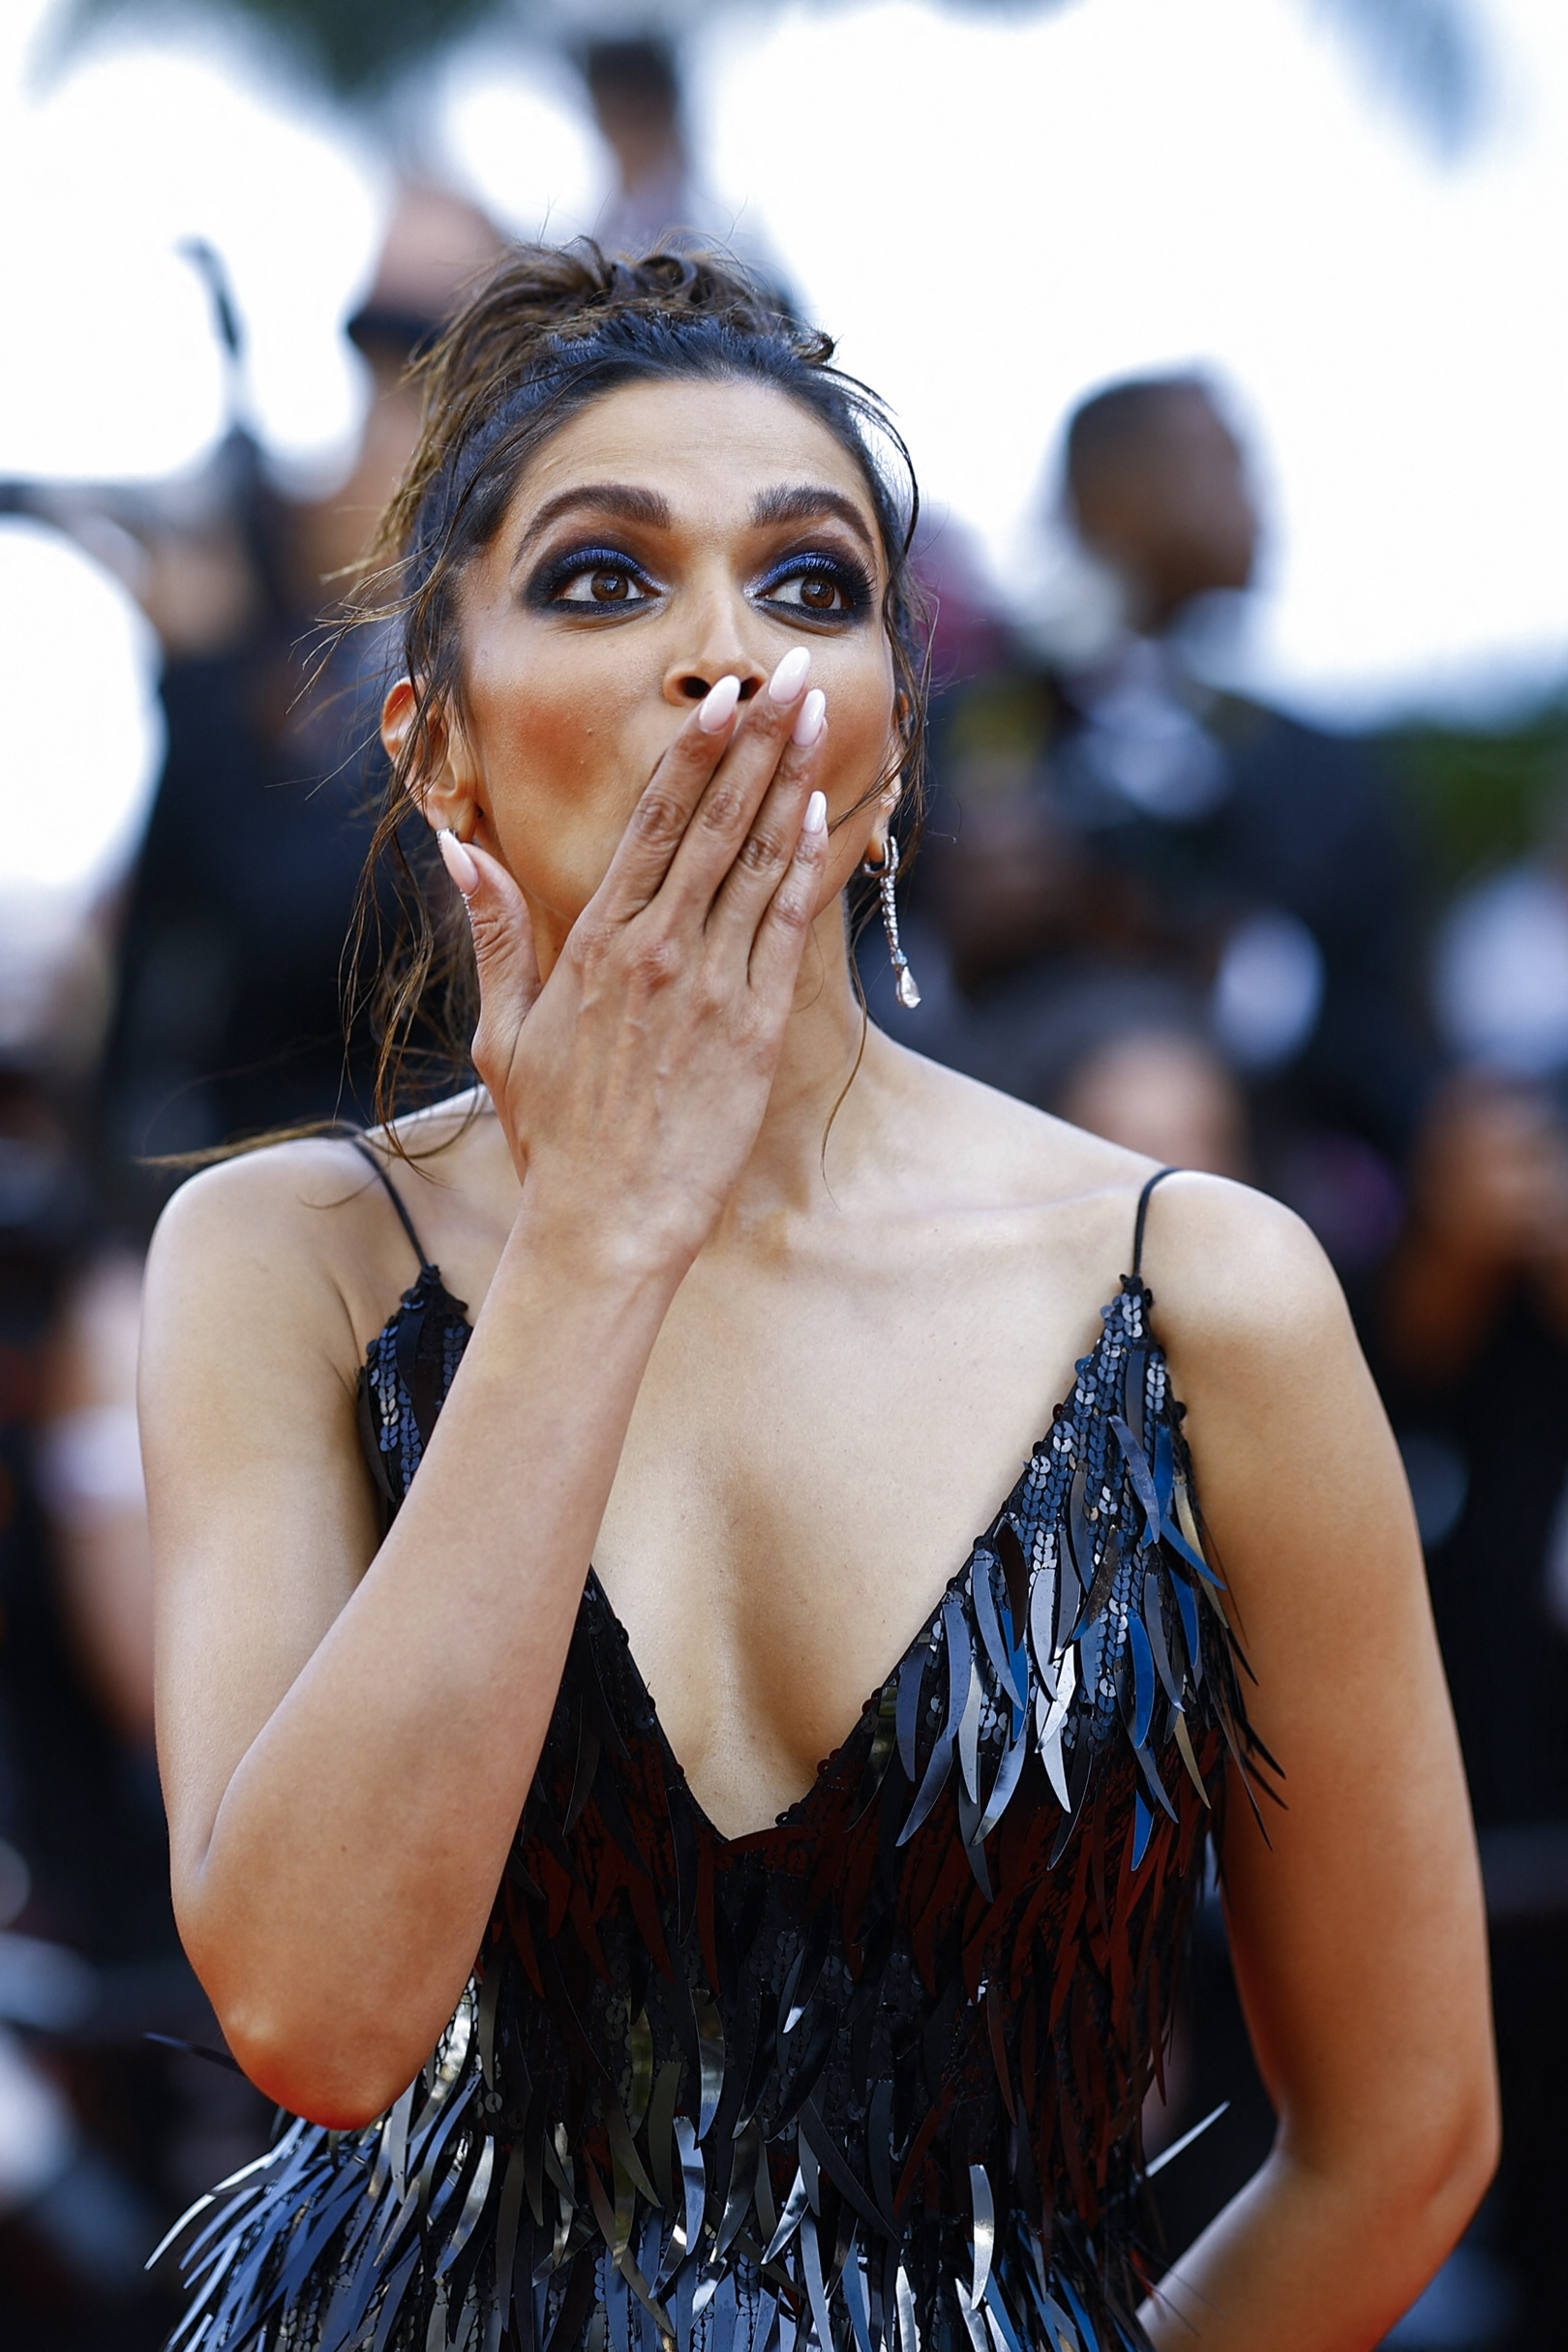 Deepika Padukone Blows Kiss in Super Hot Embellished Gown on Cannes Red